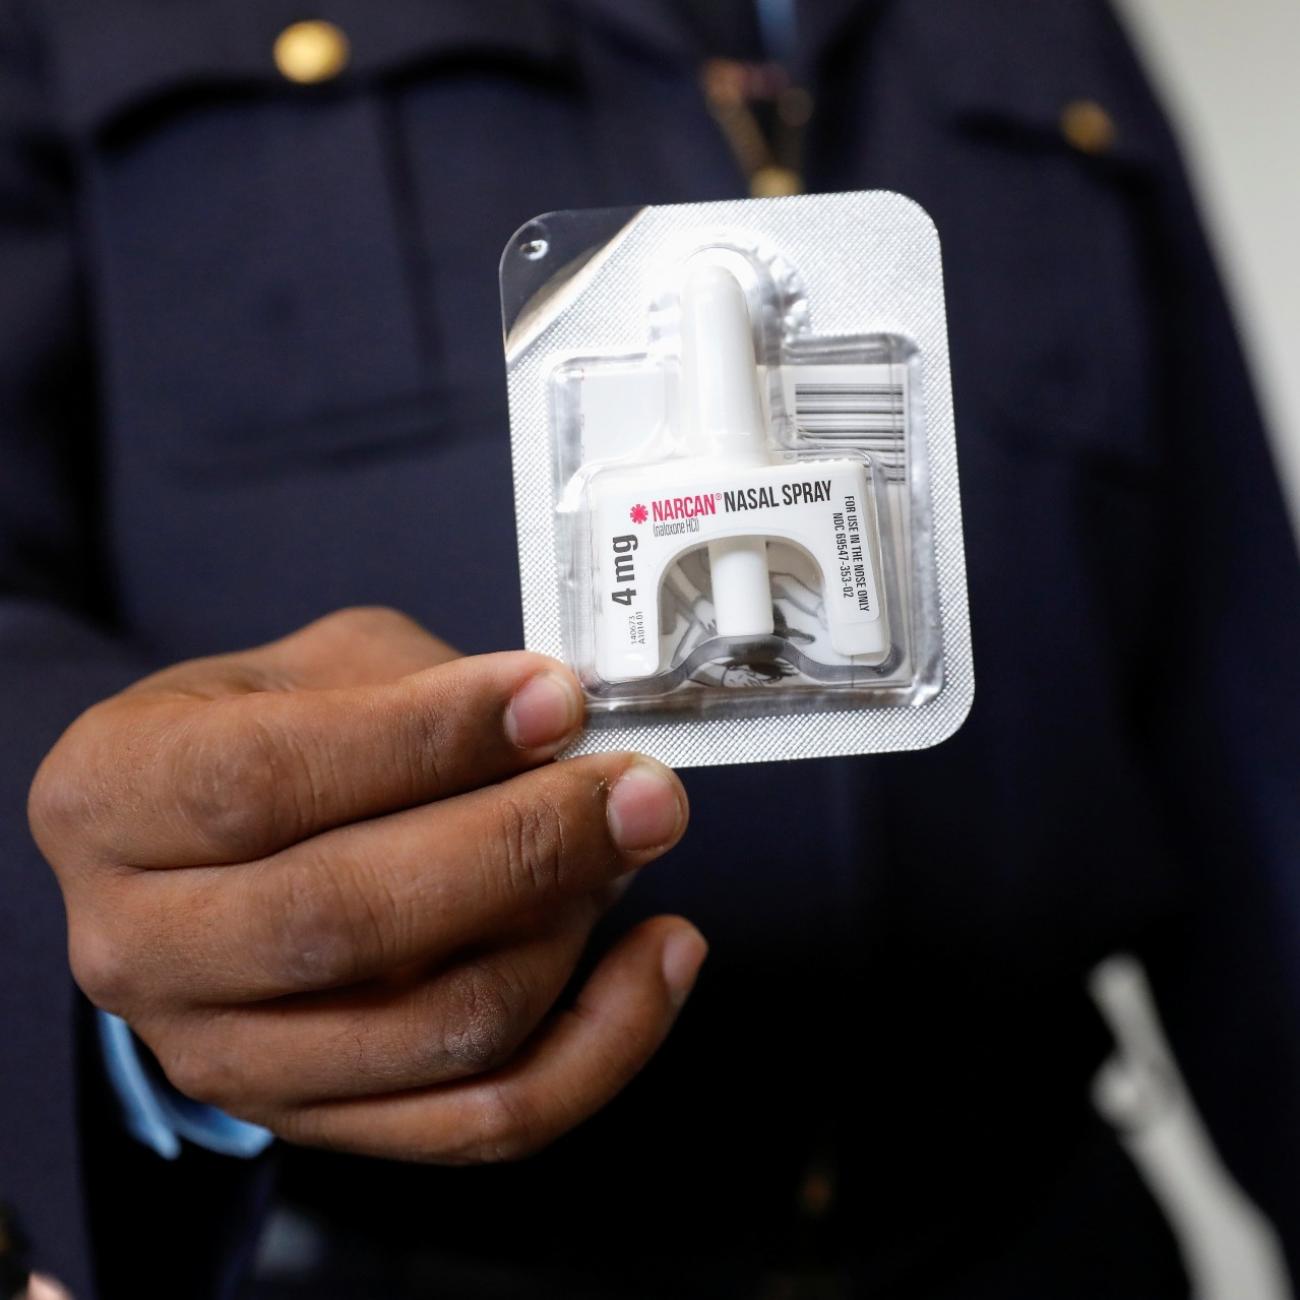 Corrections officer Anthony Willingham displays Naloxone nasal spray, part of an opioid anti-overdose medicine kit for inmates to take with them upon release, before a training session for inmates at the Queensboro Correctional Facility in Queens, New York, U.S., April 9, 2018. 